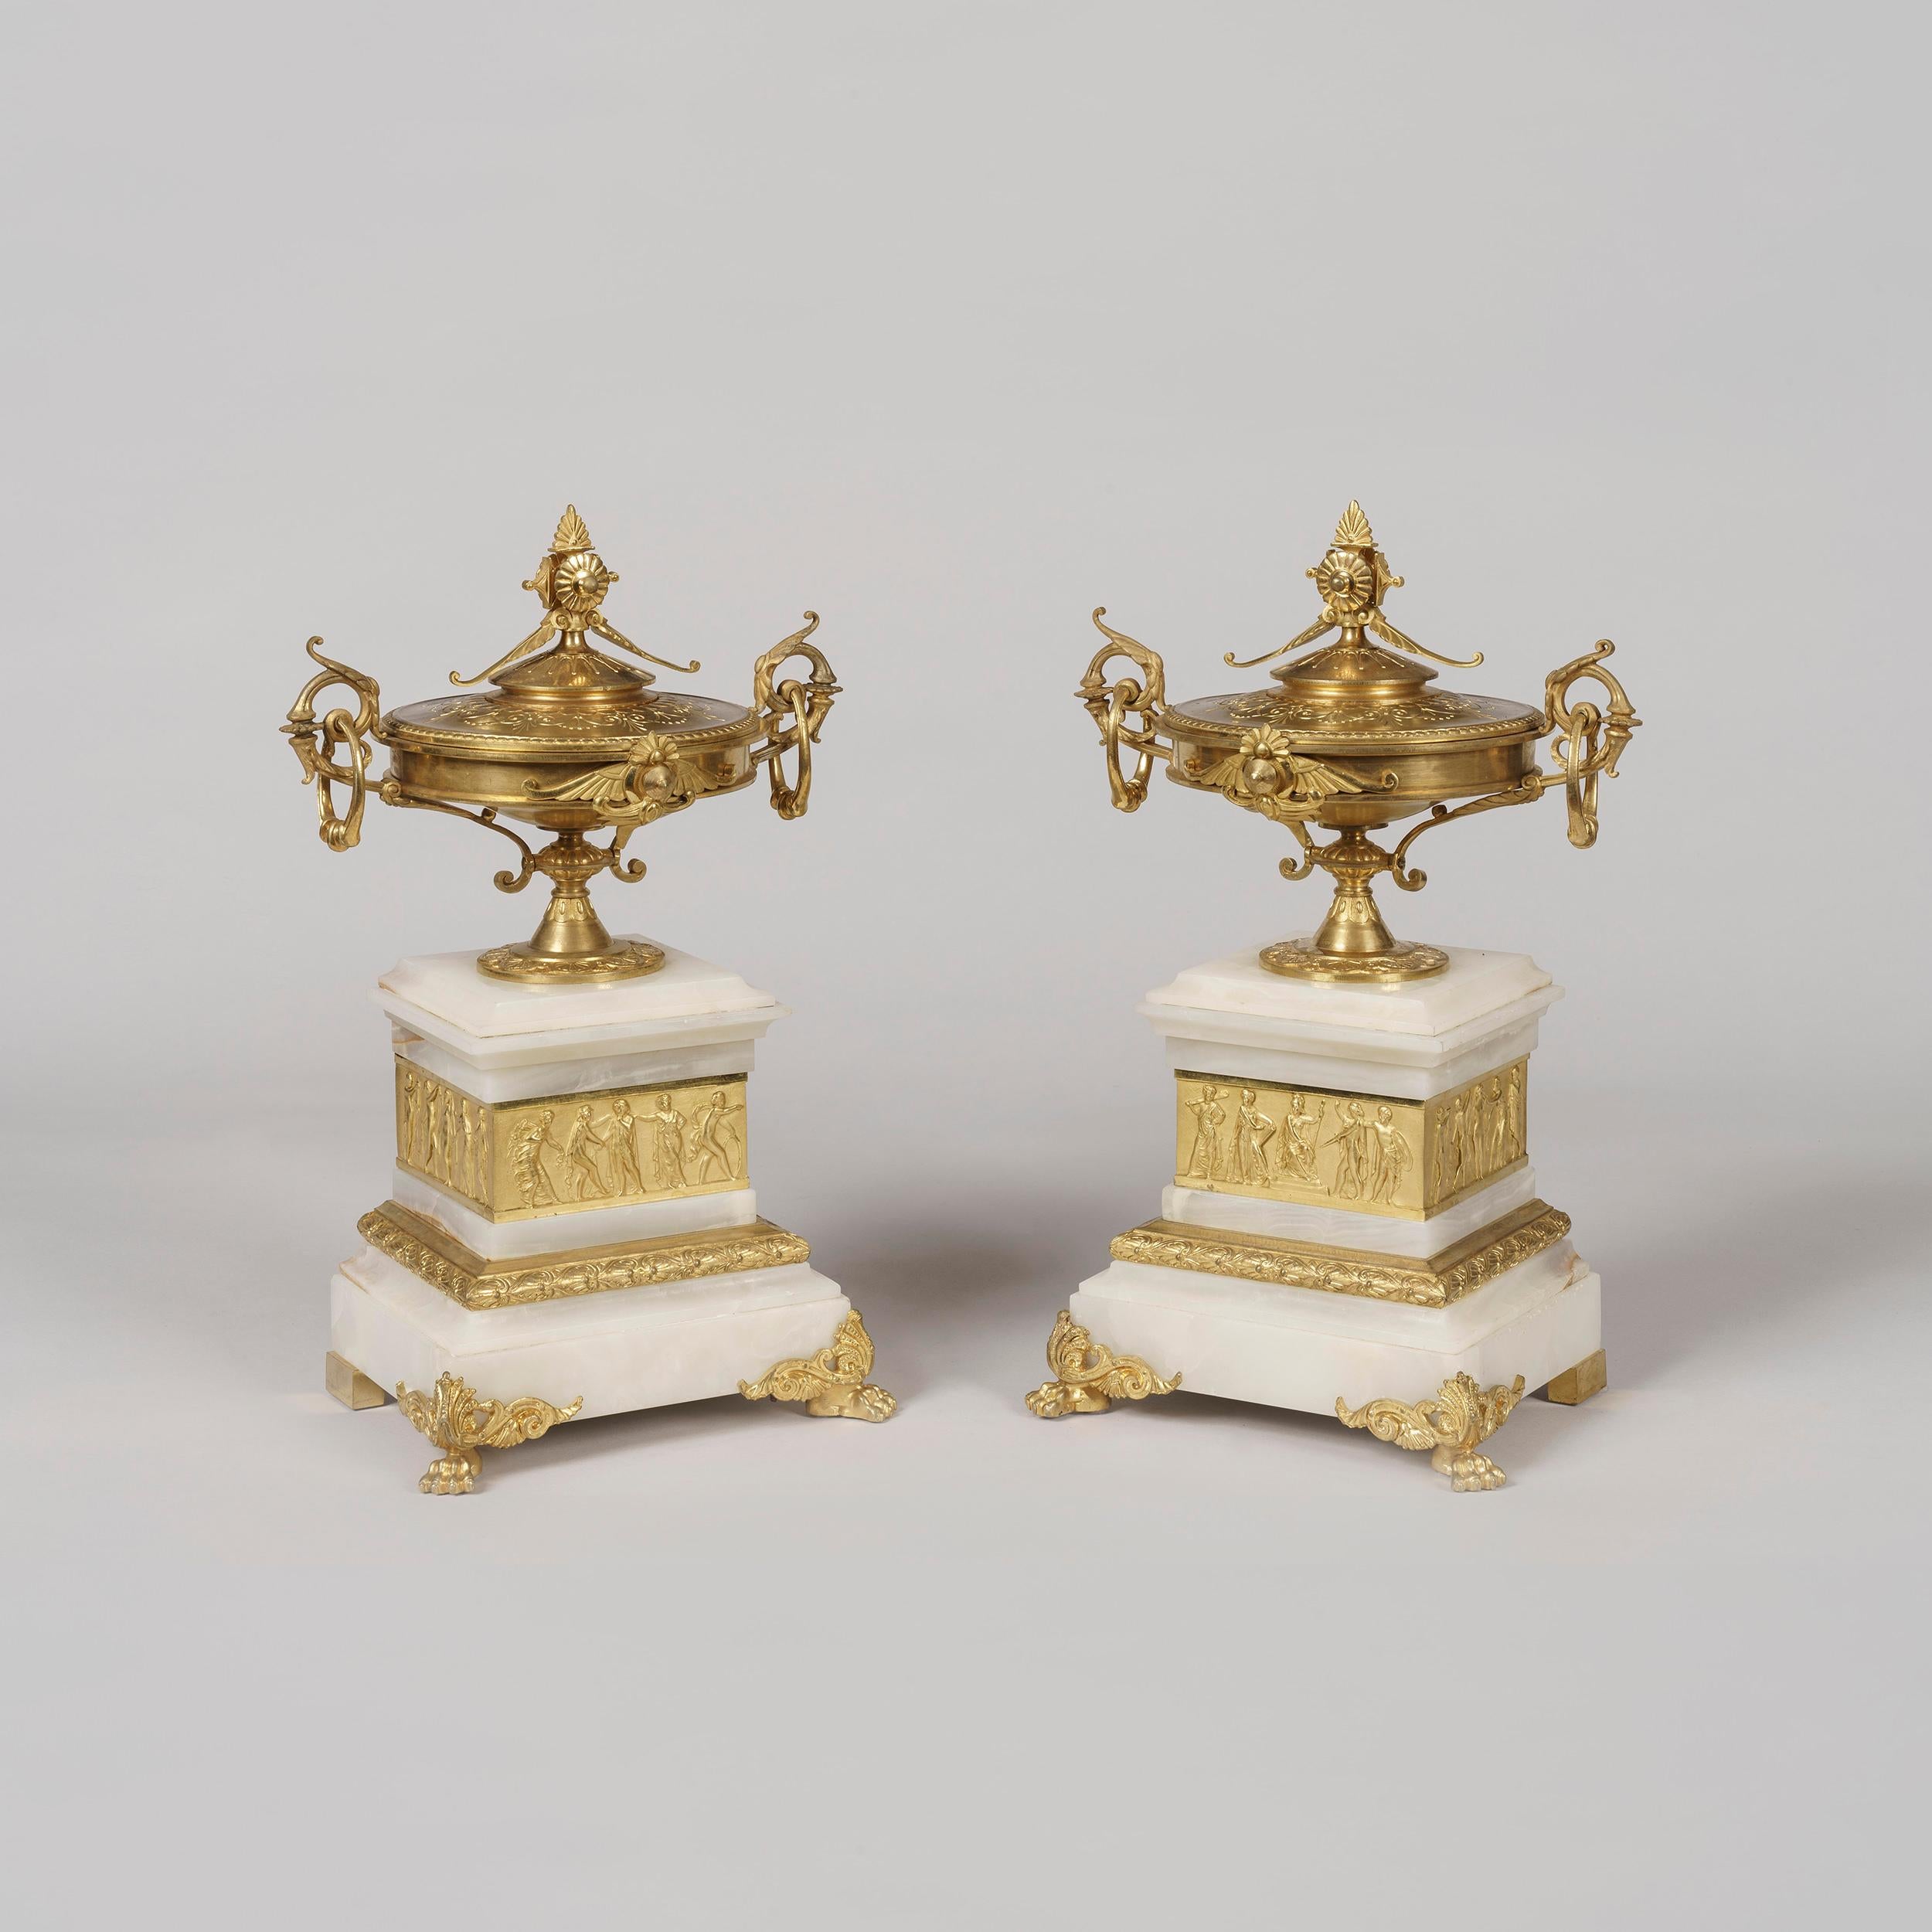 Egyptian Revival 19th Century French Onyx and Ormolu Clock Garniture in the Egyptian Manner For Sale